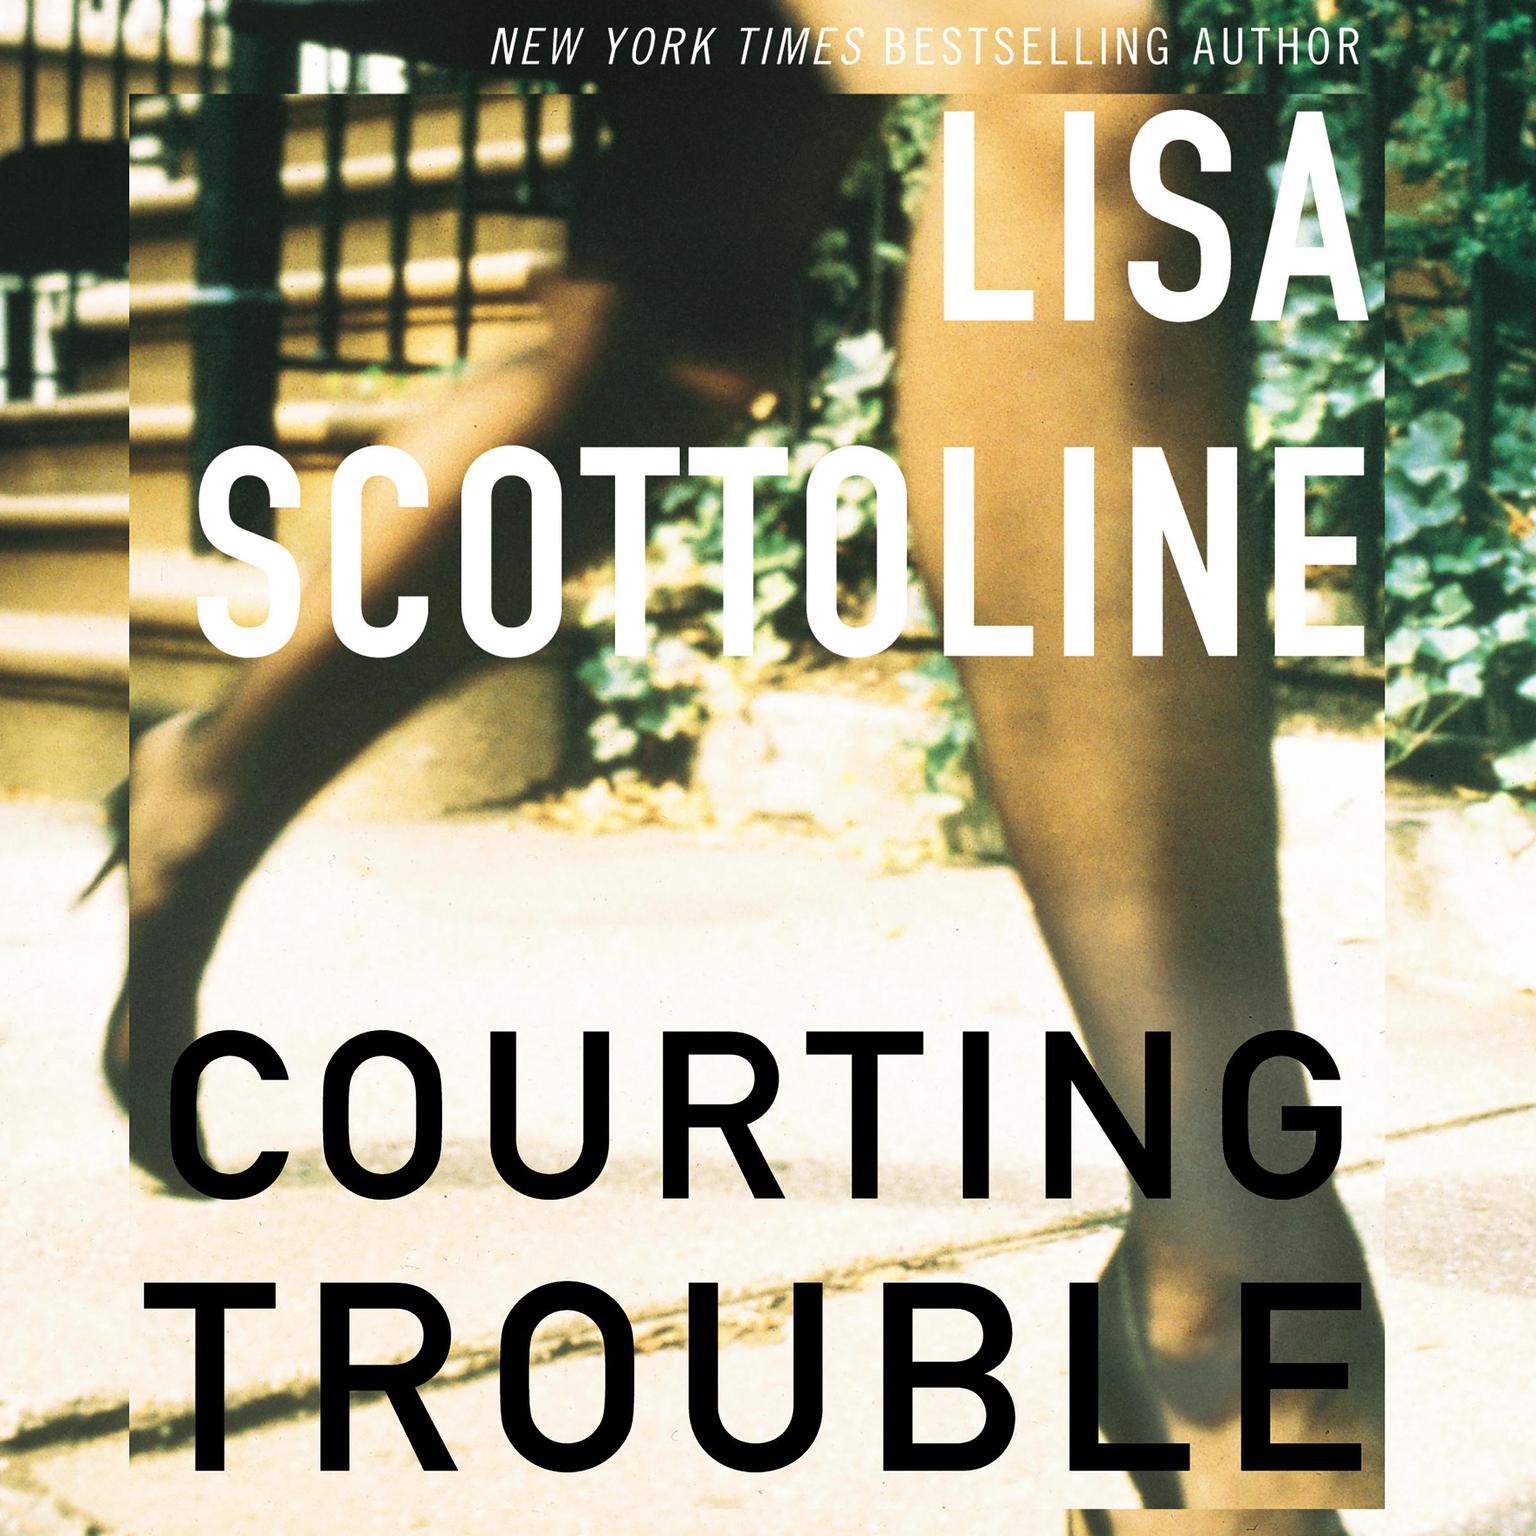 Courting Trouble Audiobook by Lisa Scottoline Listen Now